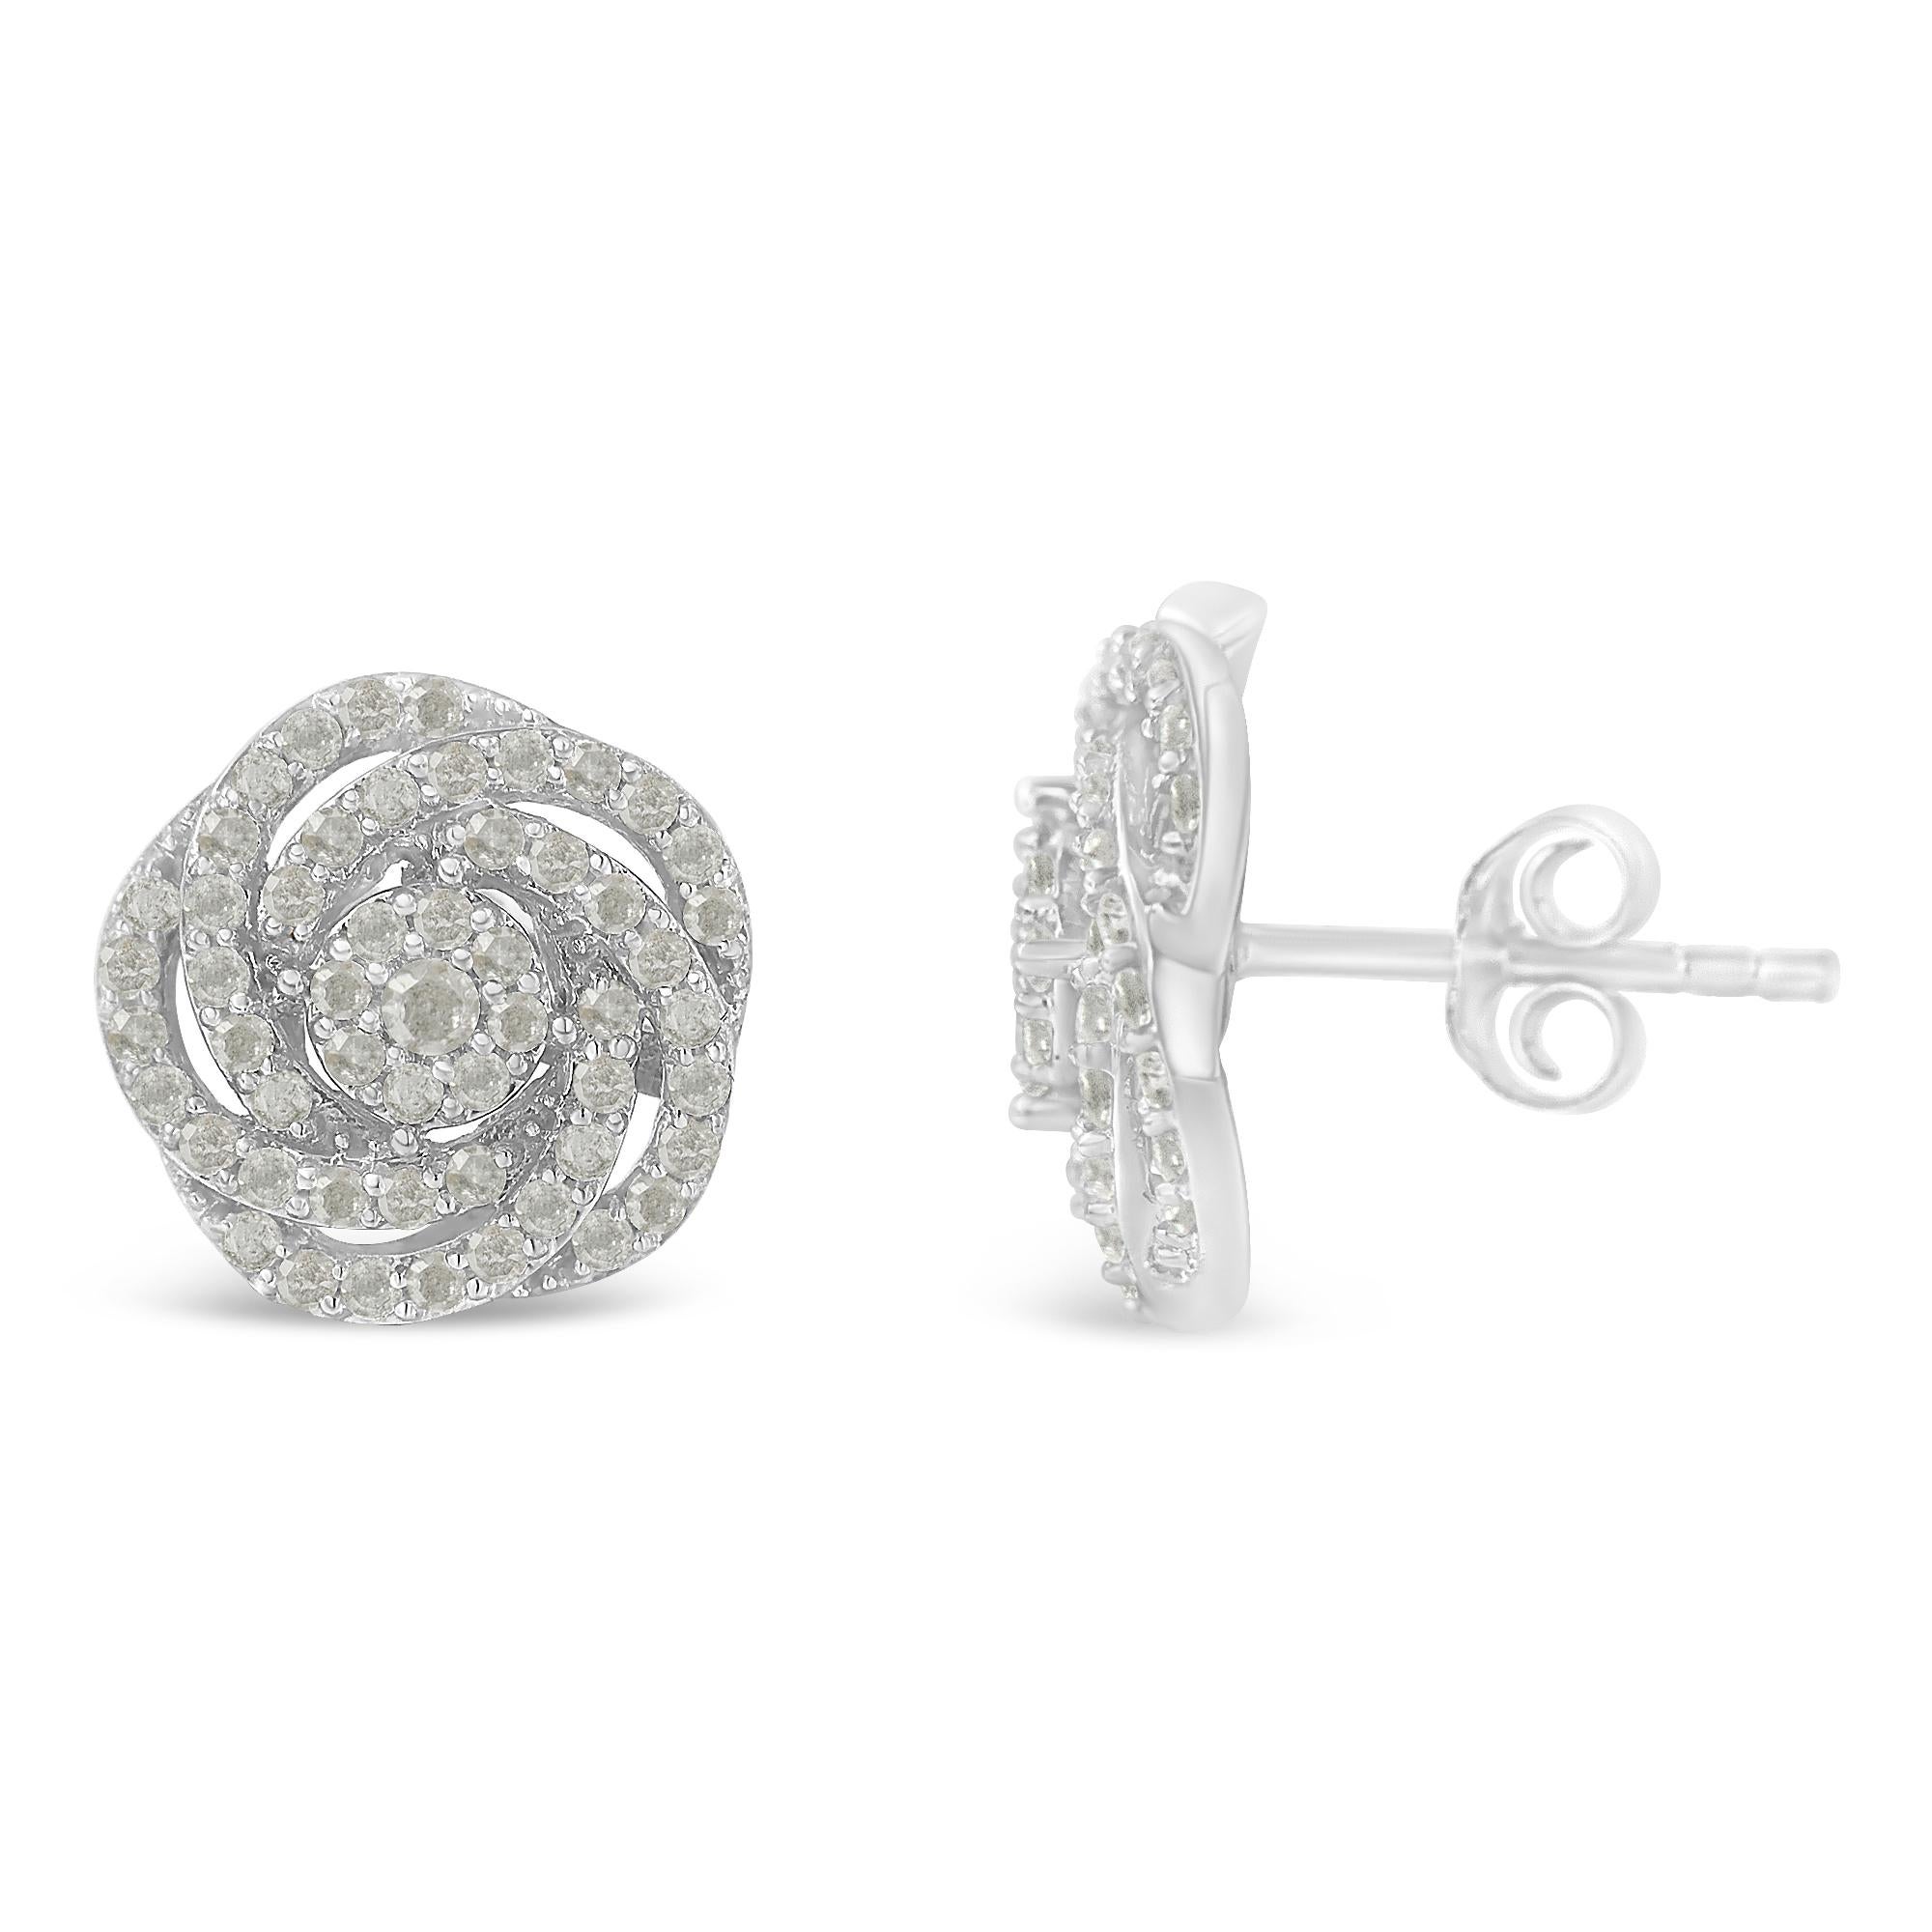 Dazzle all those around you with this white gold, rose shaped cluster stud earrings. Composed of 108 round cut diamonds that make up a total of 1 ct., this piece is meticulously designed to add a bit of shimmer to her face. Give a touch of elegance